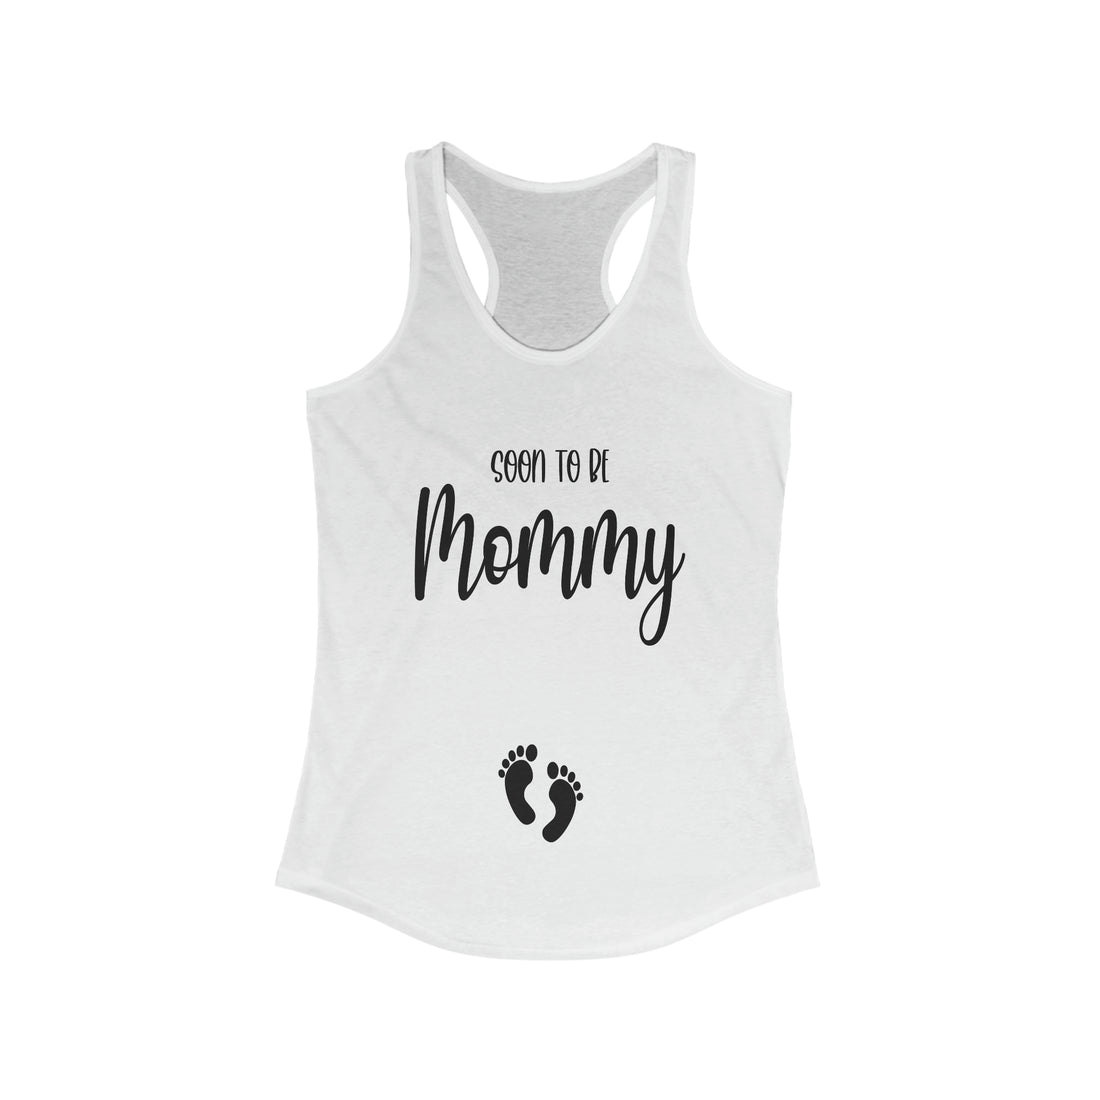 Soon To Be Mommy - Racerback Tank Top